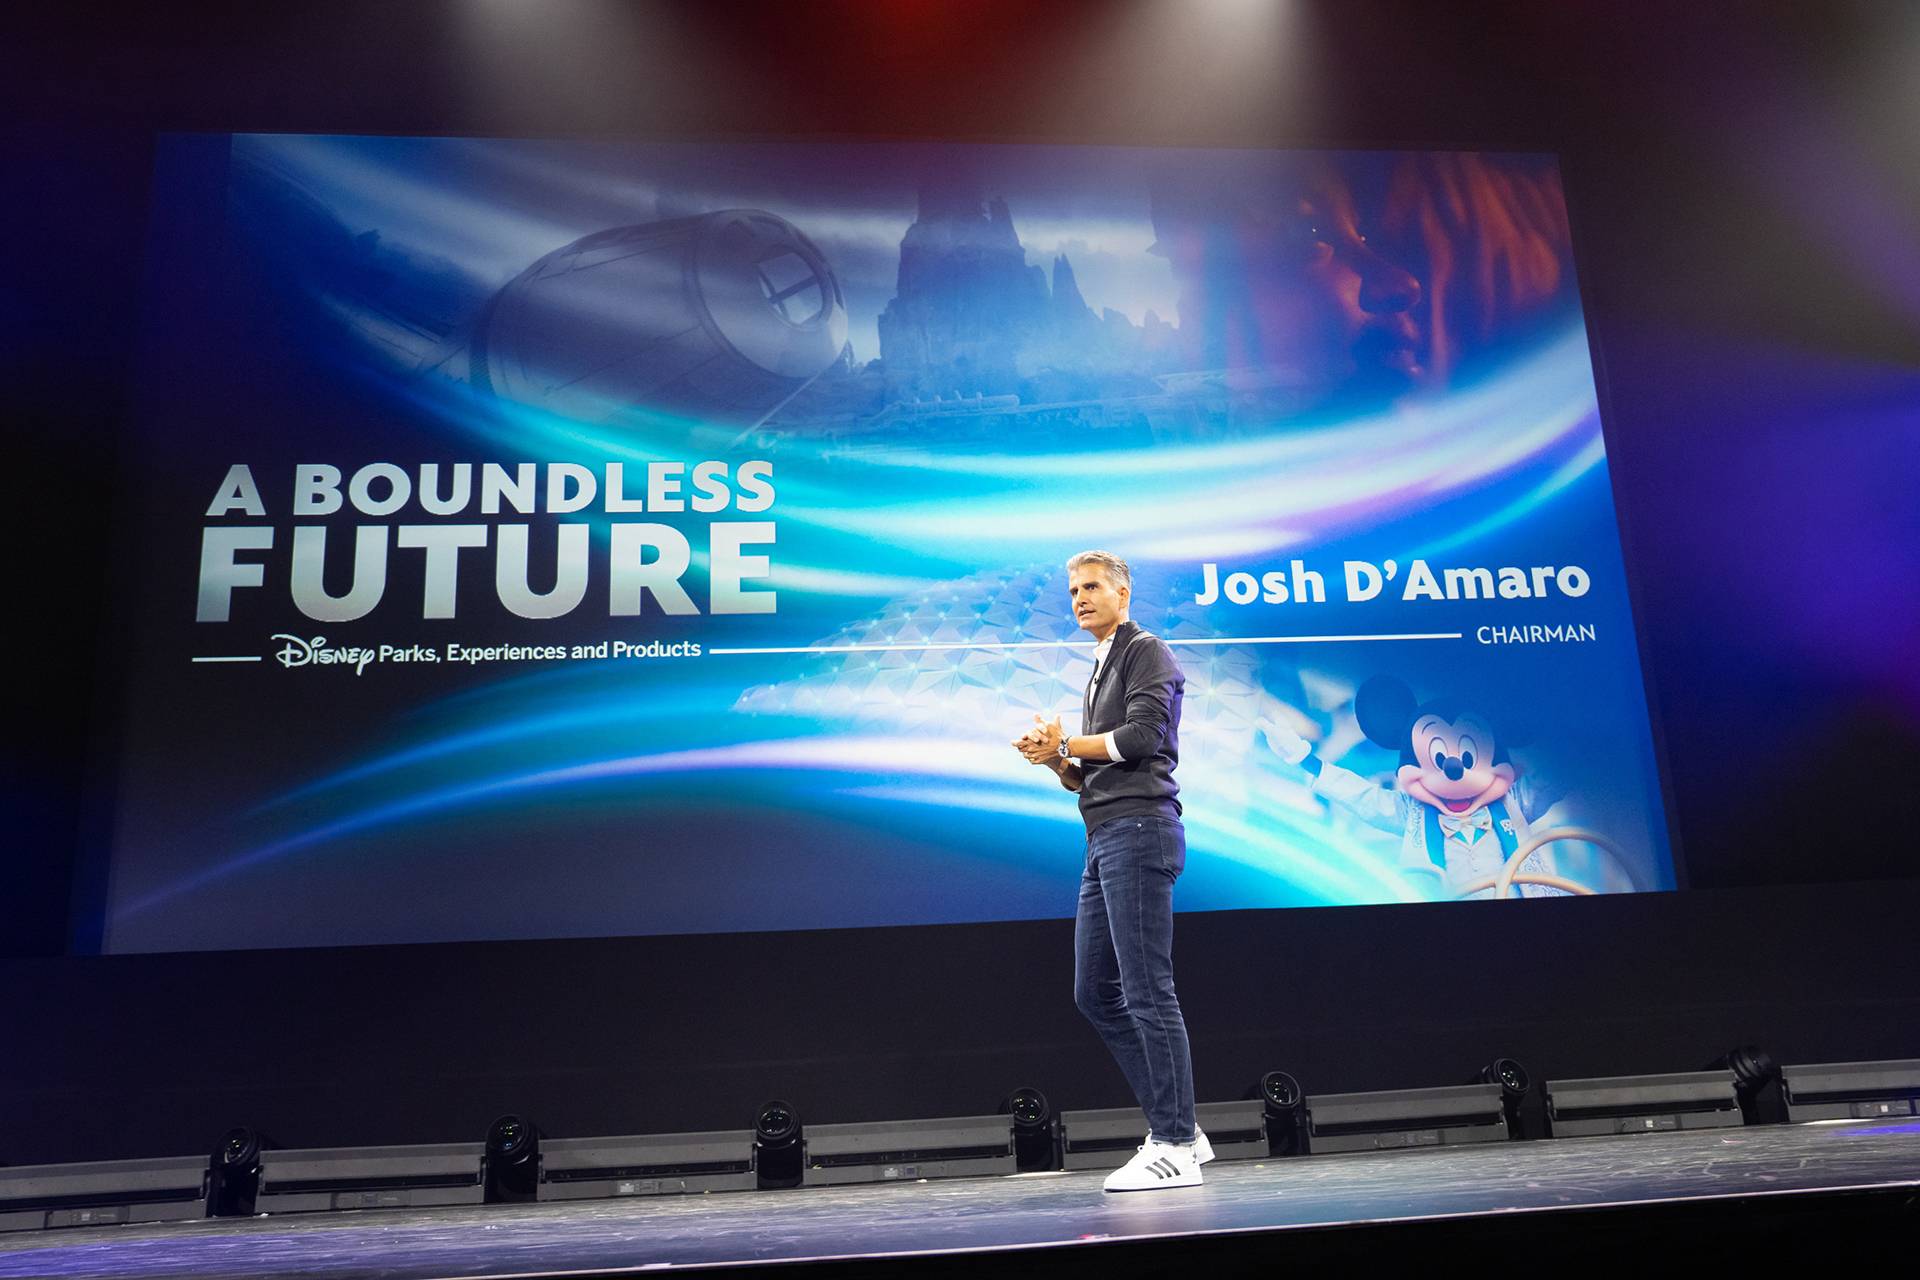 Disney Parks, Experiences and Products Chairman Josh D'Amaro at D23 Expo